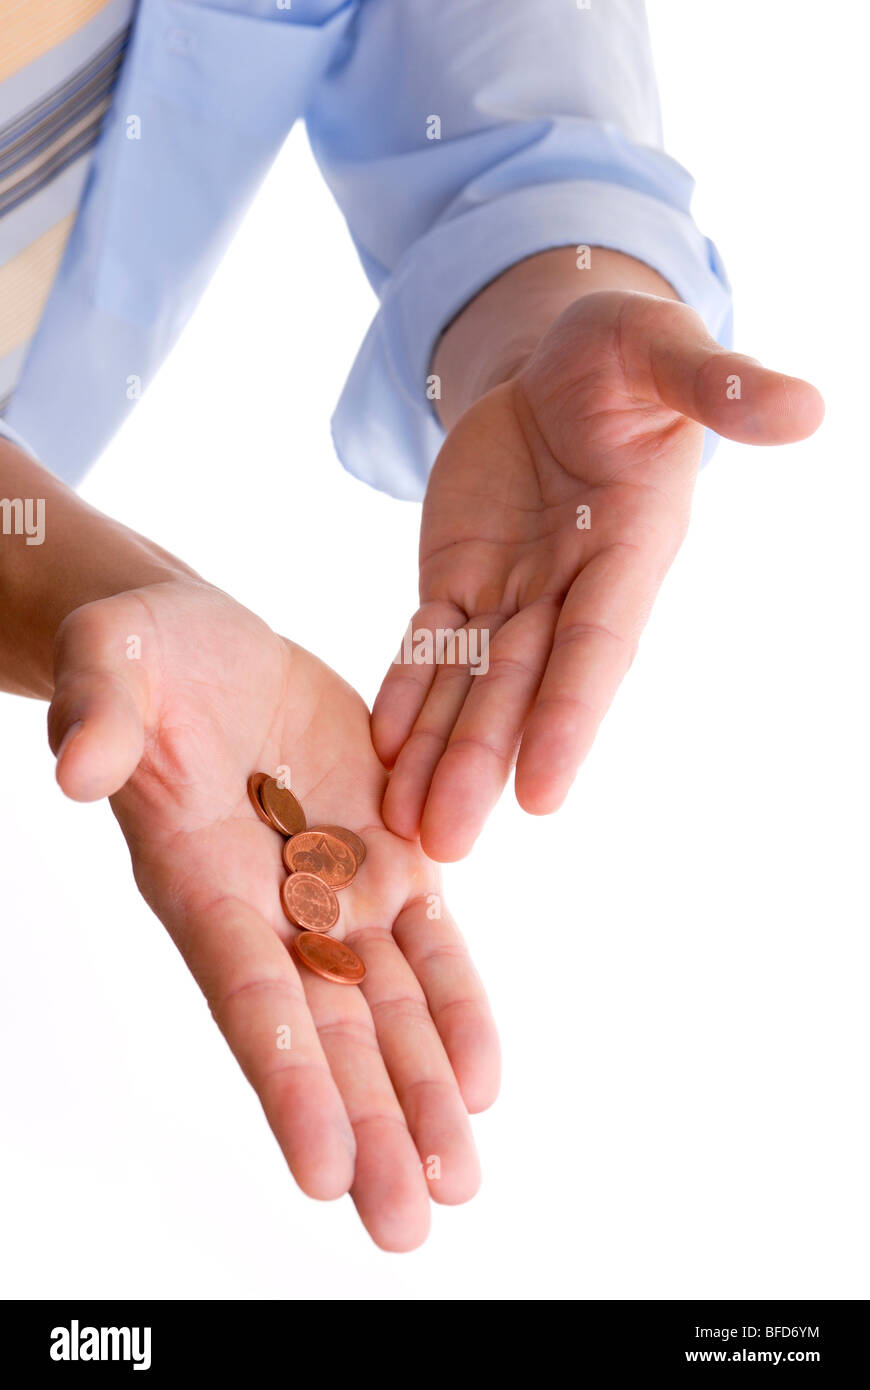 Cents in a hand Stock Photo